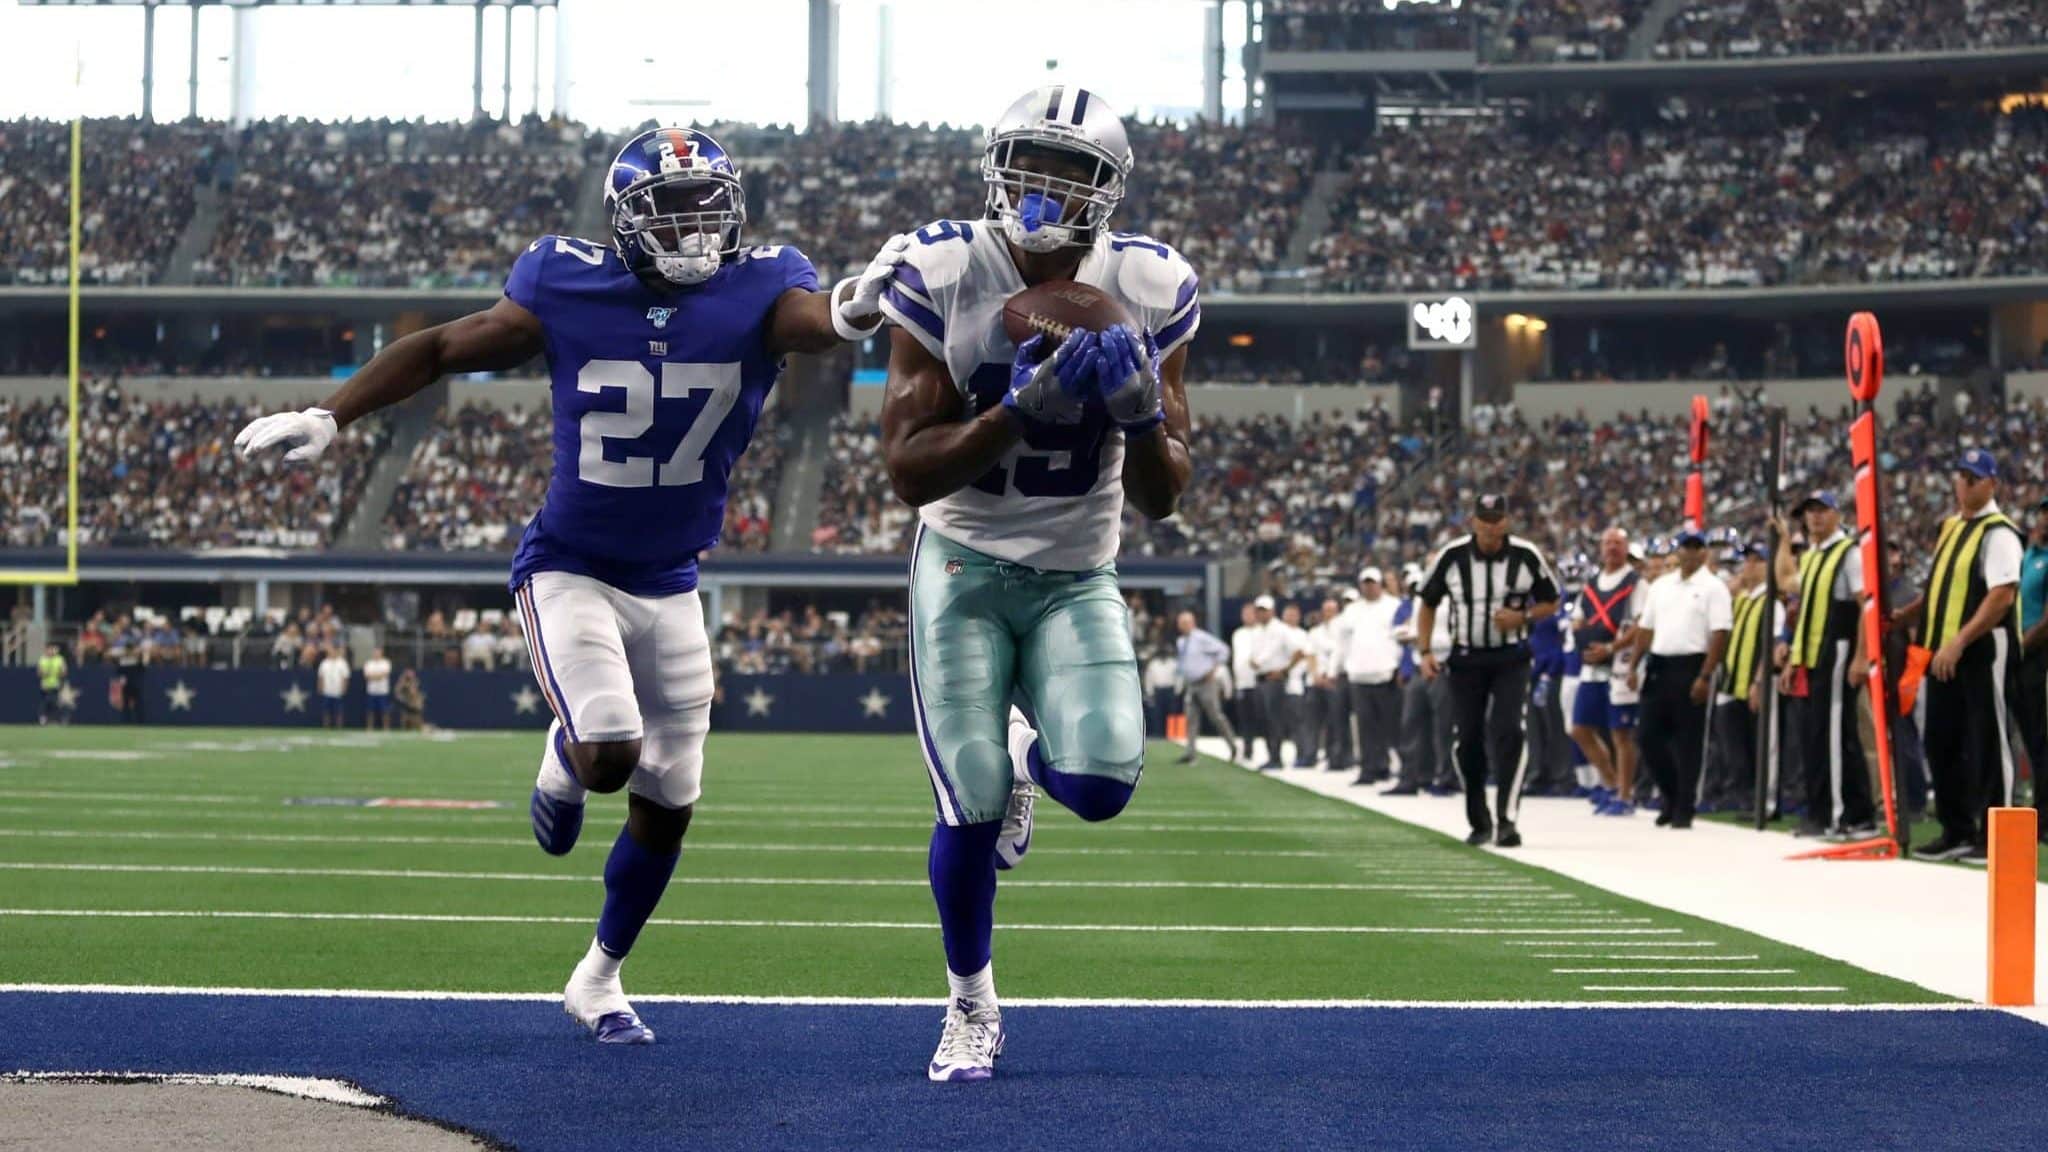 ARLINGTON, TEXAS - SEPTEMBER 08: Wide receiver Amari Cooper #19 of the Dallas Cowboys makes the recption for a touchdown in front of cornerback Deandre Baker #27 of the New York Giants during the second quarter of the game at AT&T Stadium on September 08, 2019 in Arlington, Texas.